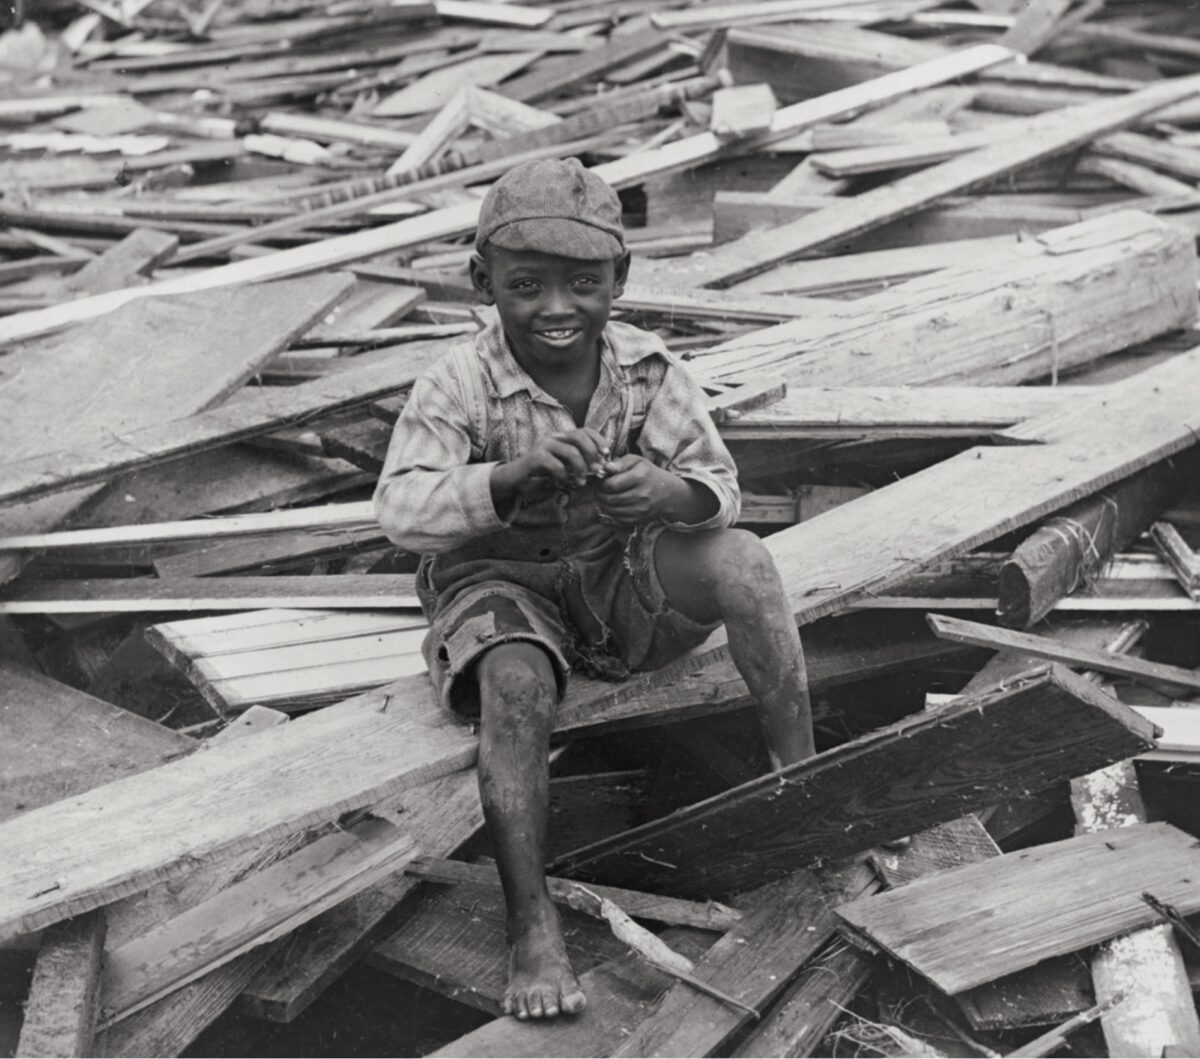 A young boy sits on debris in
the wake of the deadliest natural disaster in American history. (Zahner/Library of Congress)